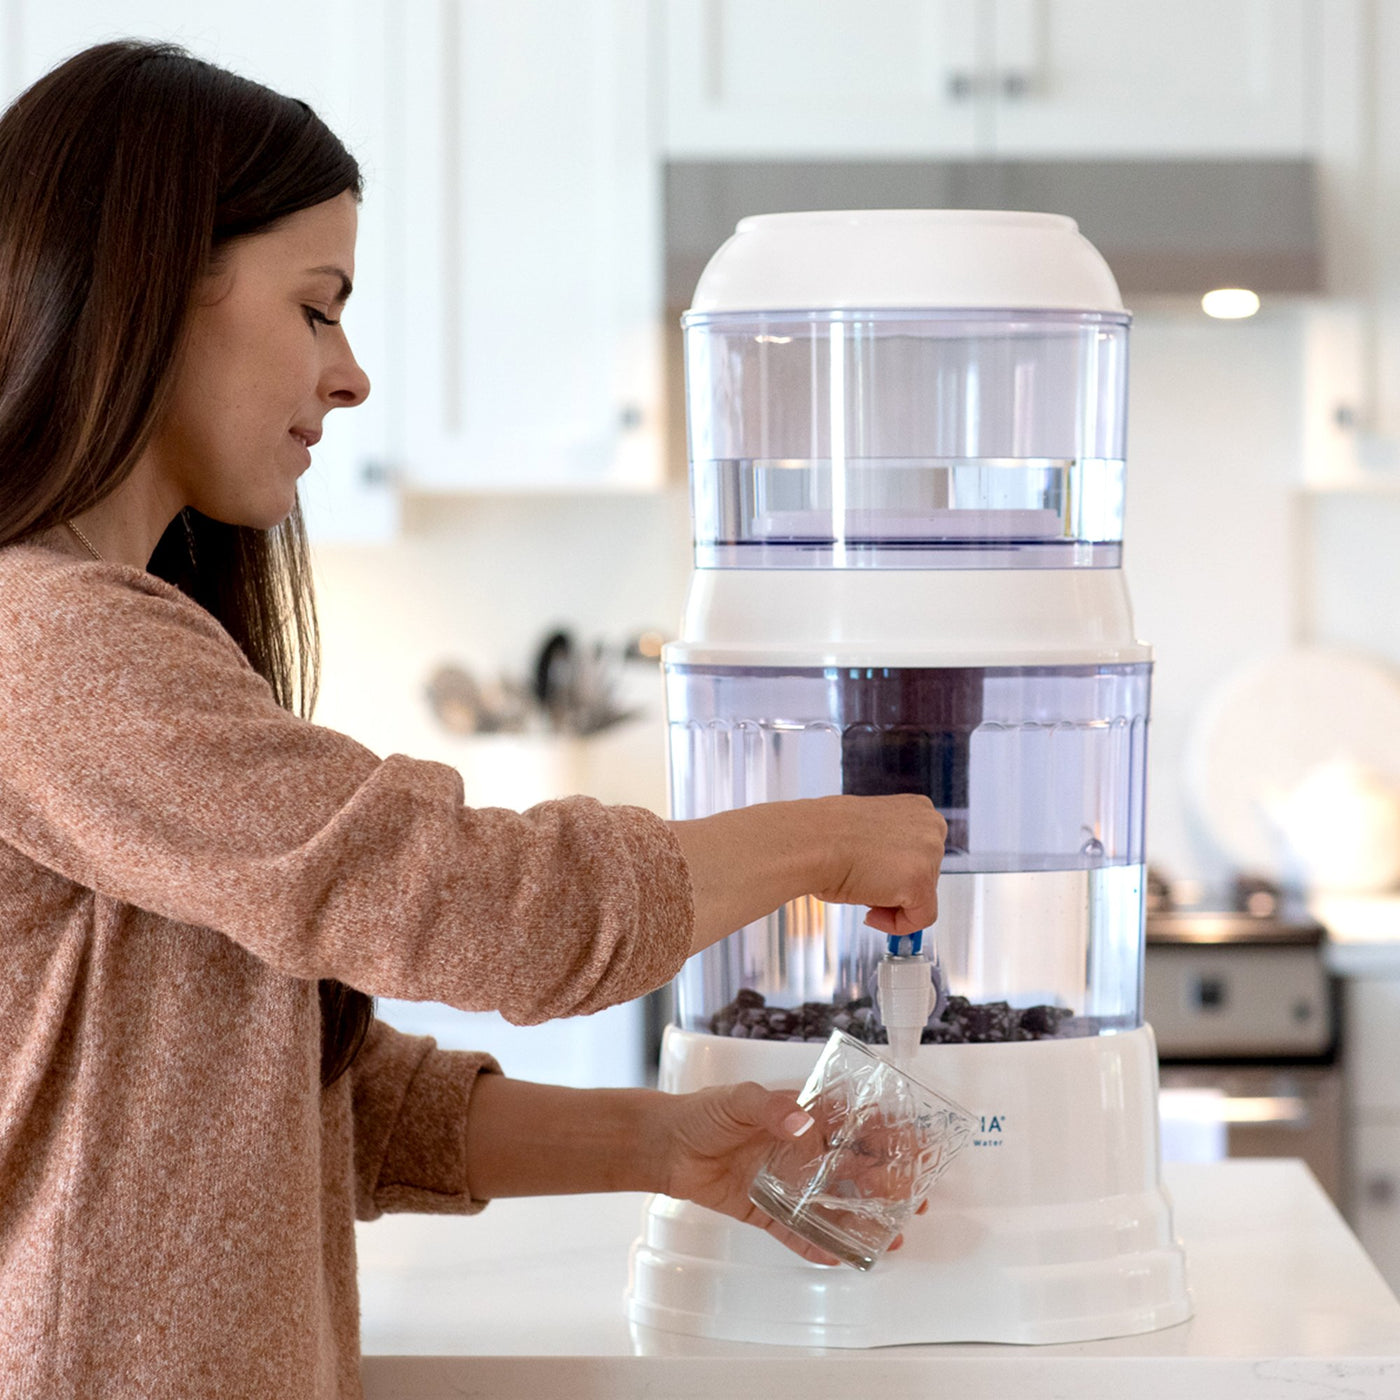  The Santevia Gravity Water System Countertop Model being used in a kitchen by a smiling woman